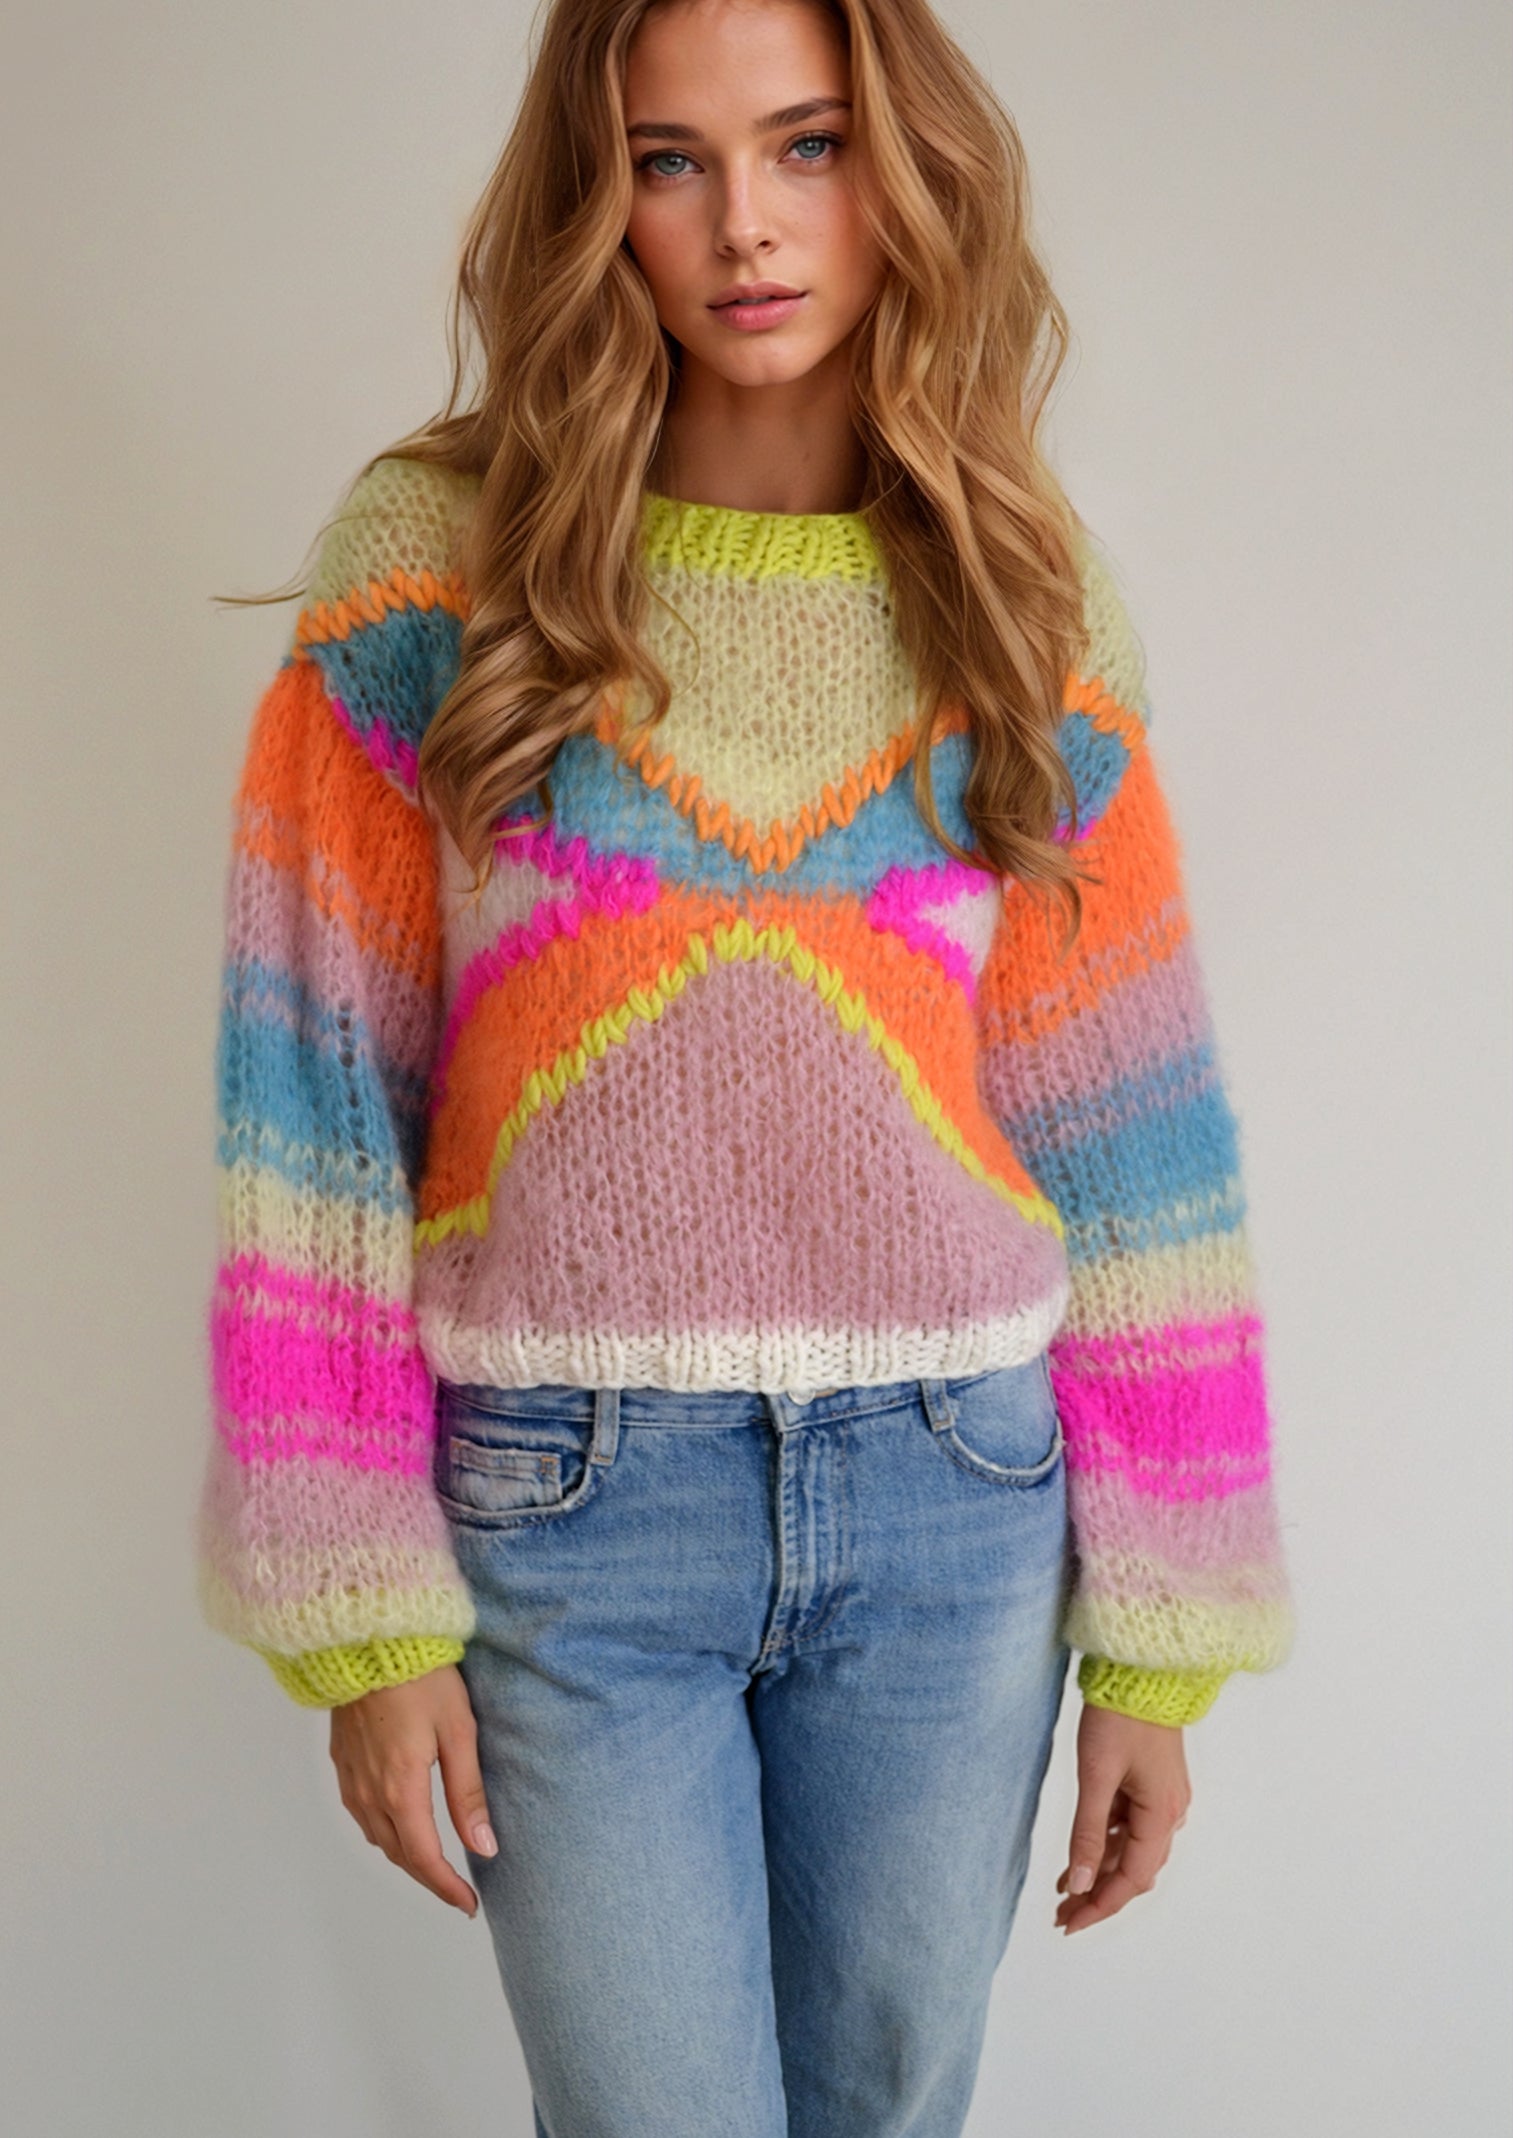 Handknitted sweater,colorful knitwear, handmade sweater, Handmade cardigan, colorful fashion,Handknitted jacket, colorful sweater